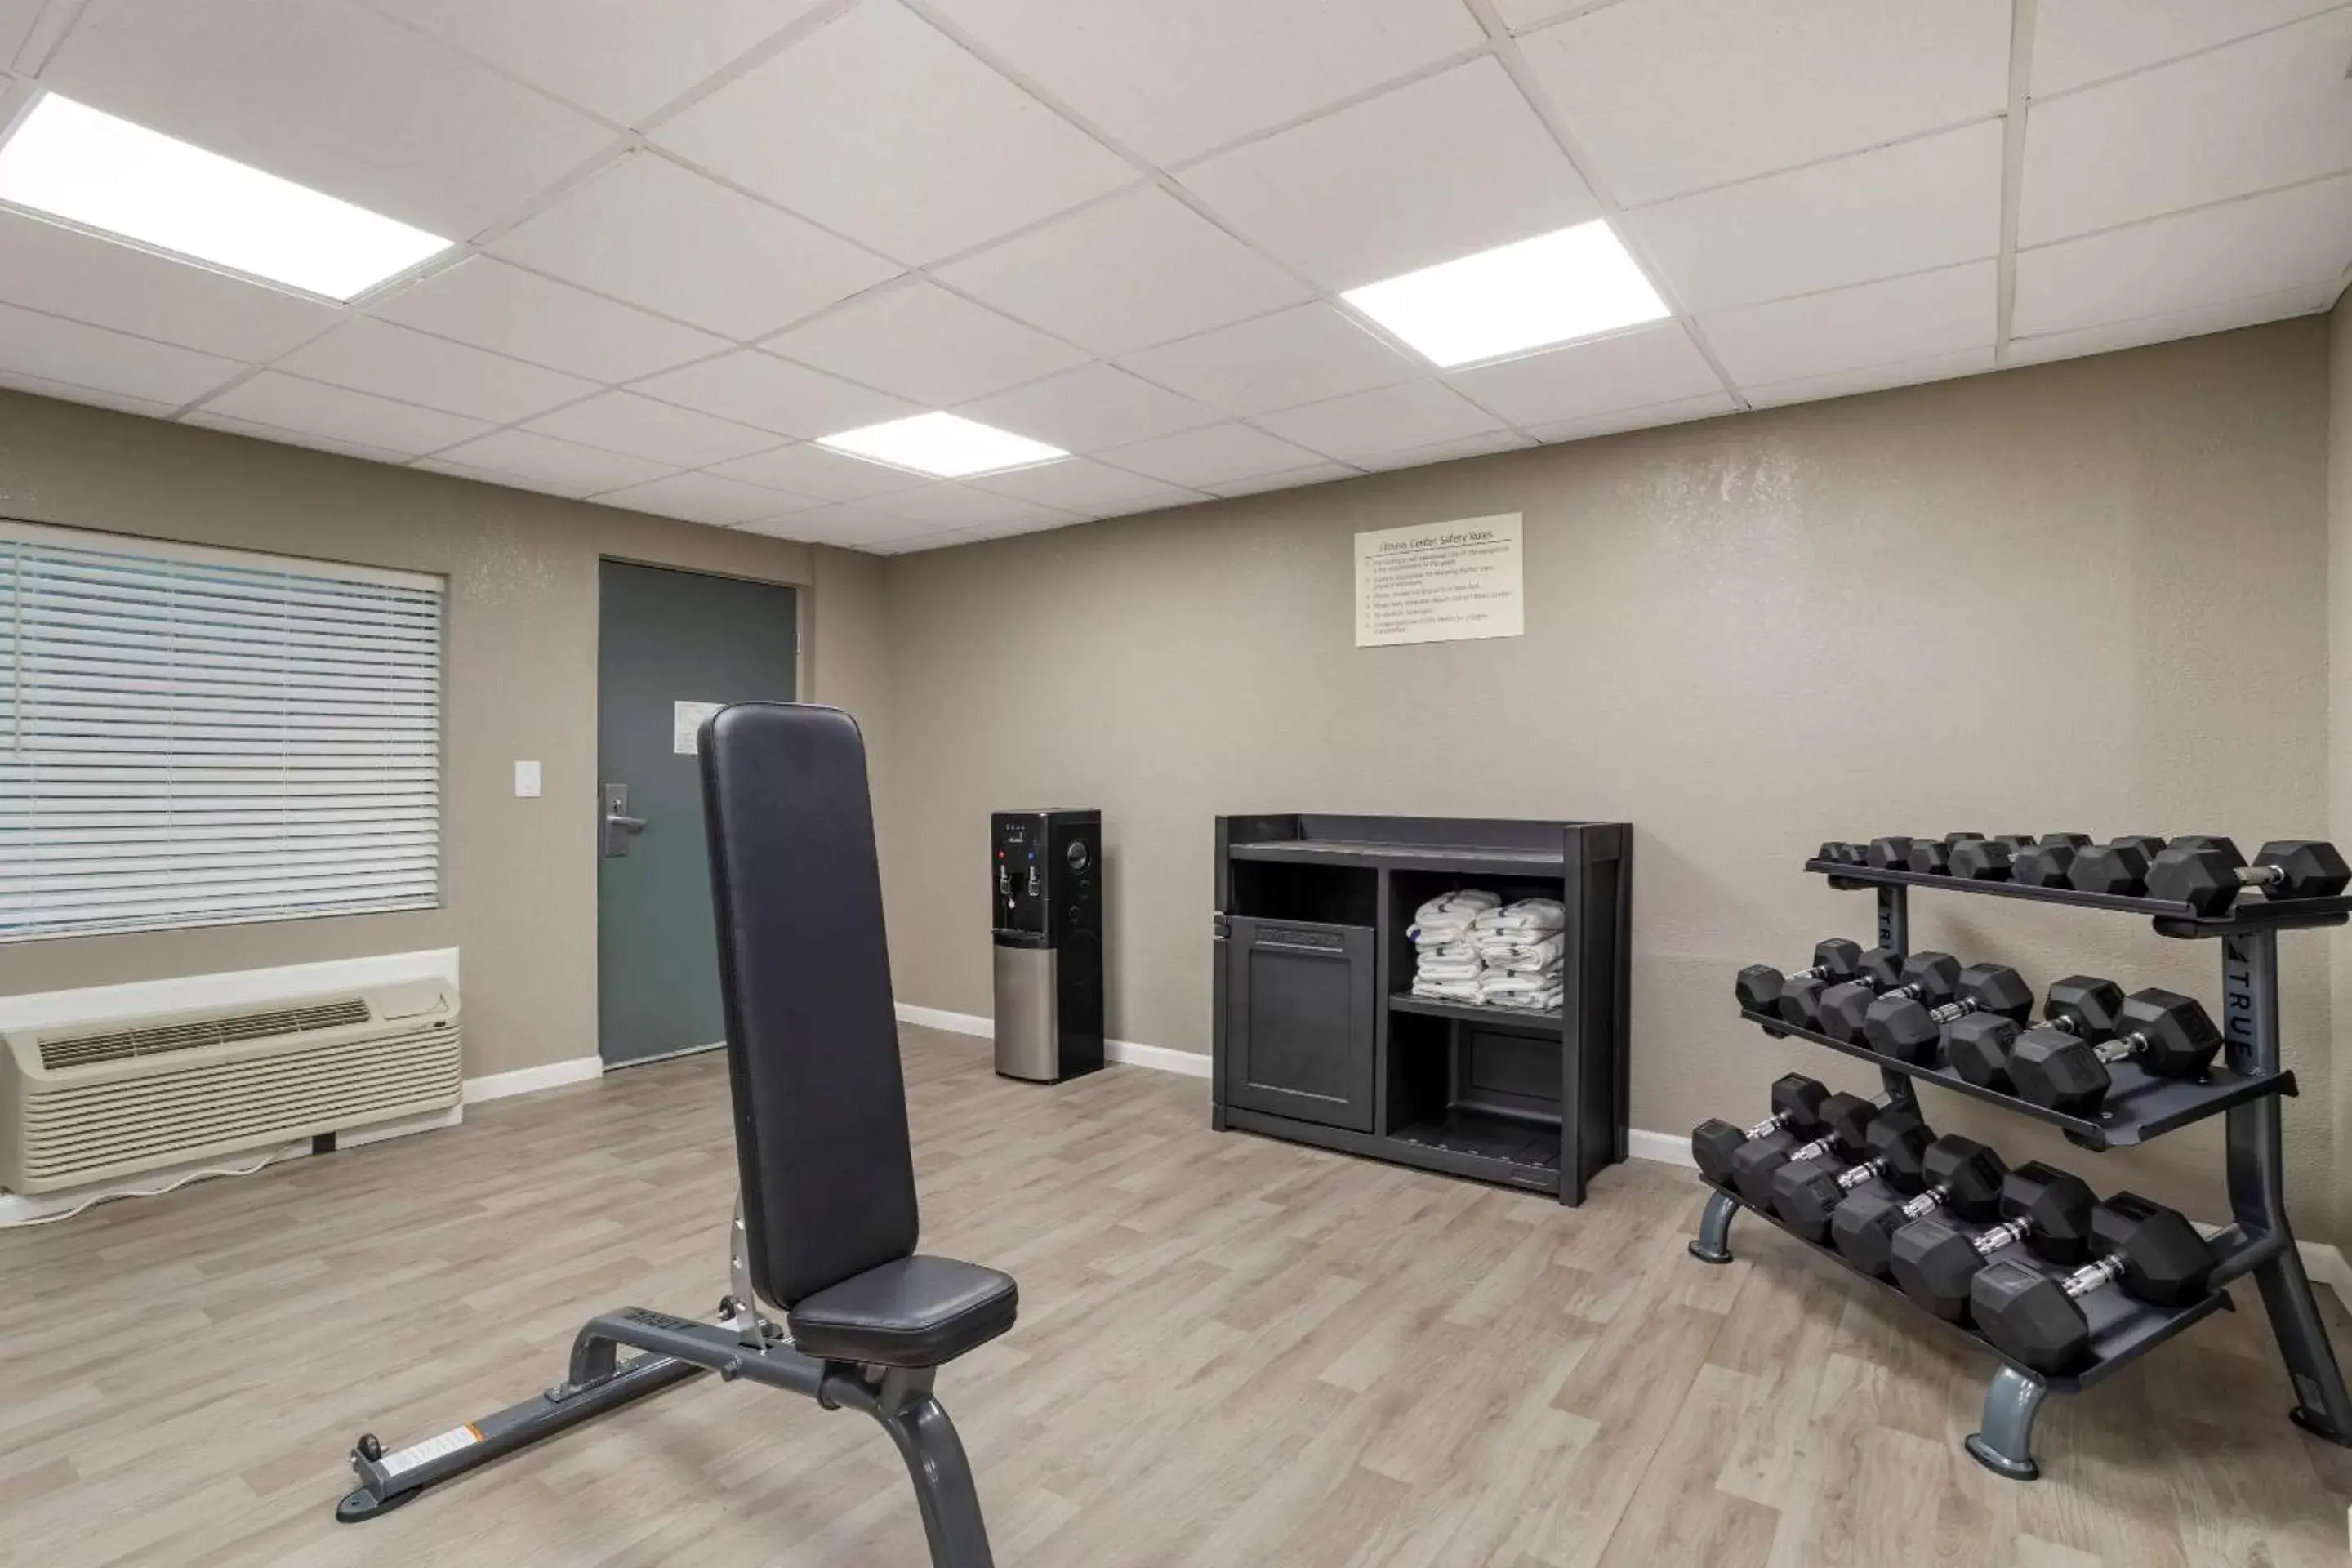 Fitness centre/facilities, Fitness Center/Facilities in Clarion Pointe Kimball, TN